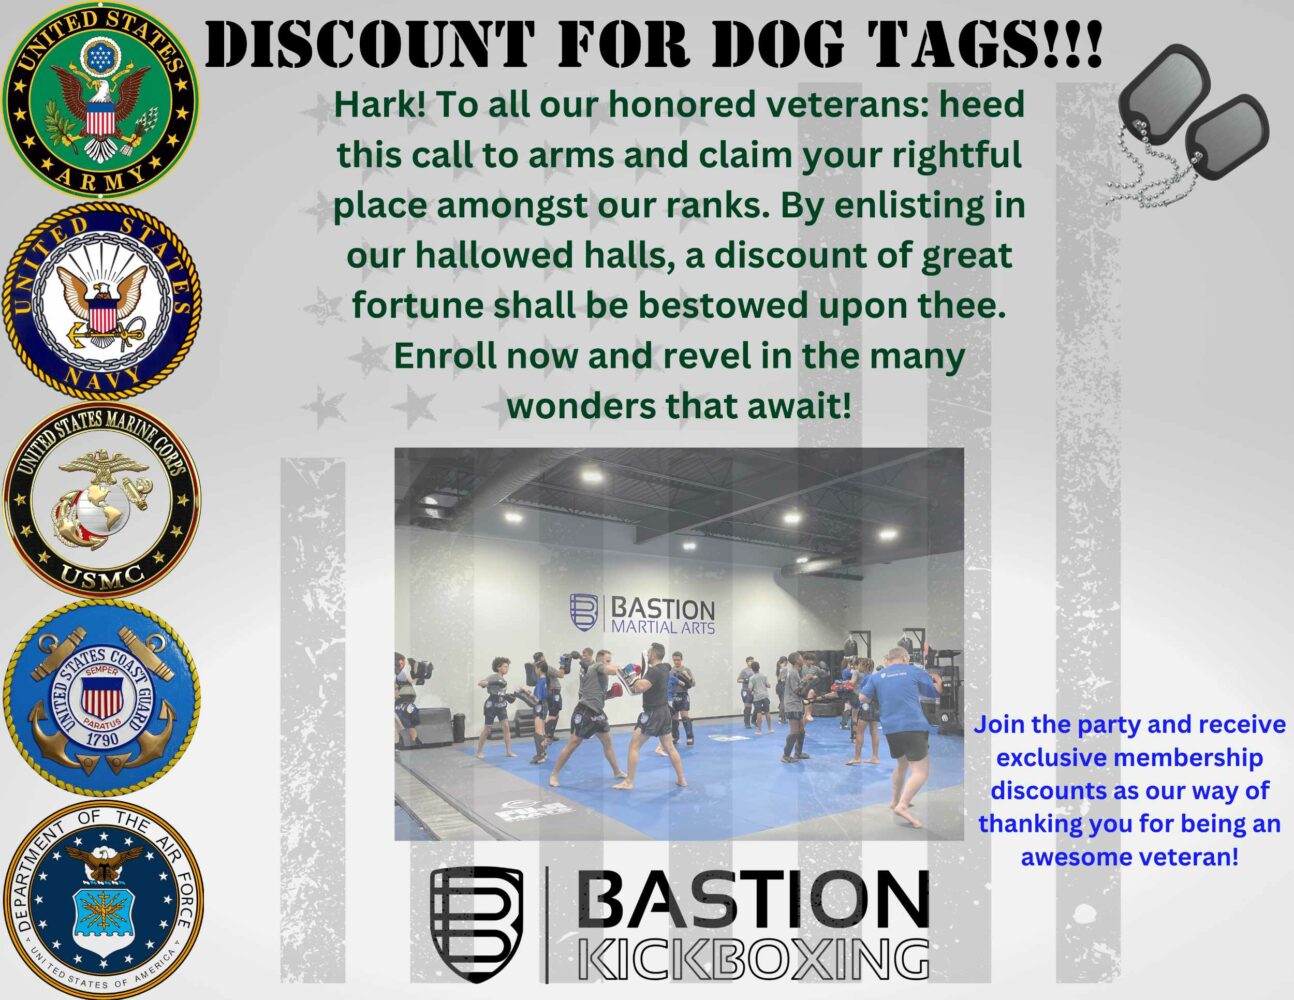 Bastion Martial Arts Discounts for Dog Tags